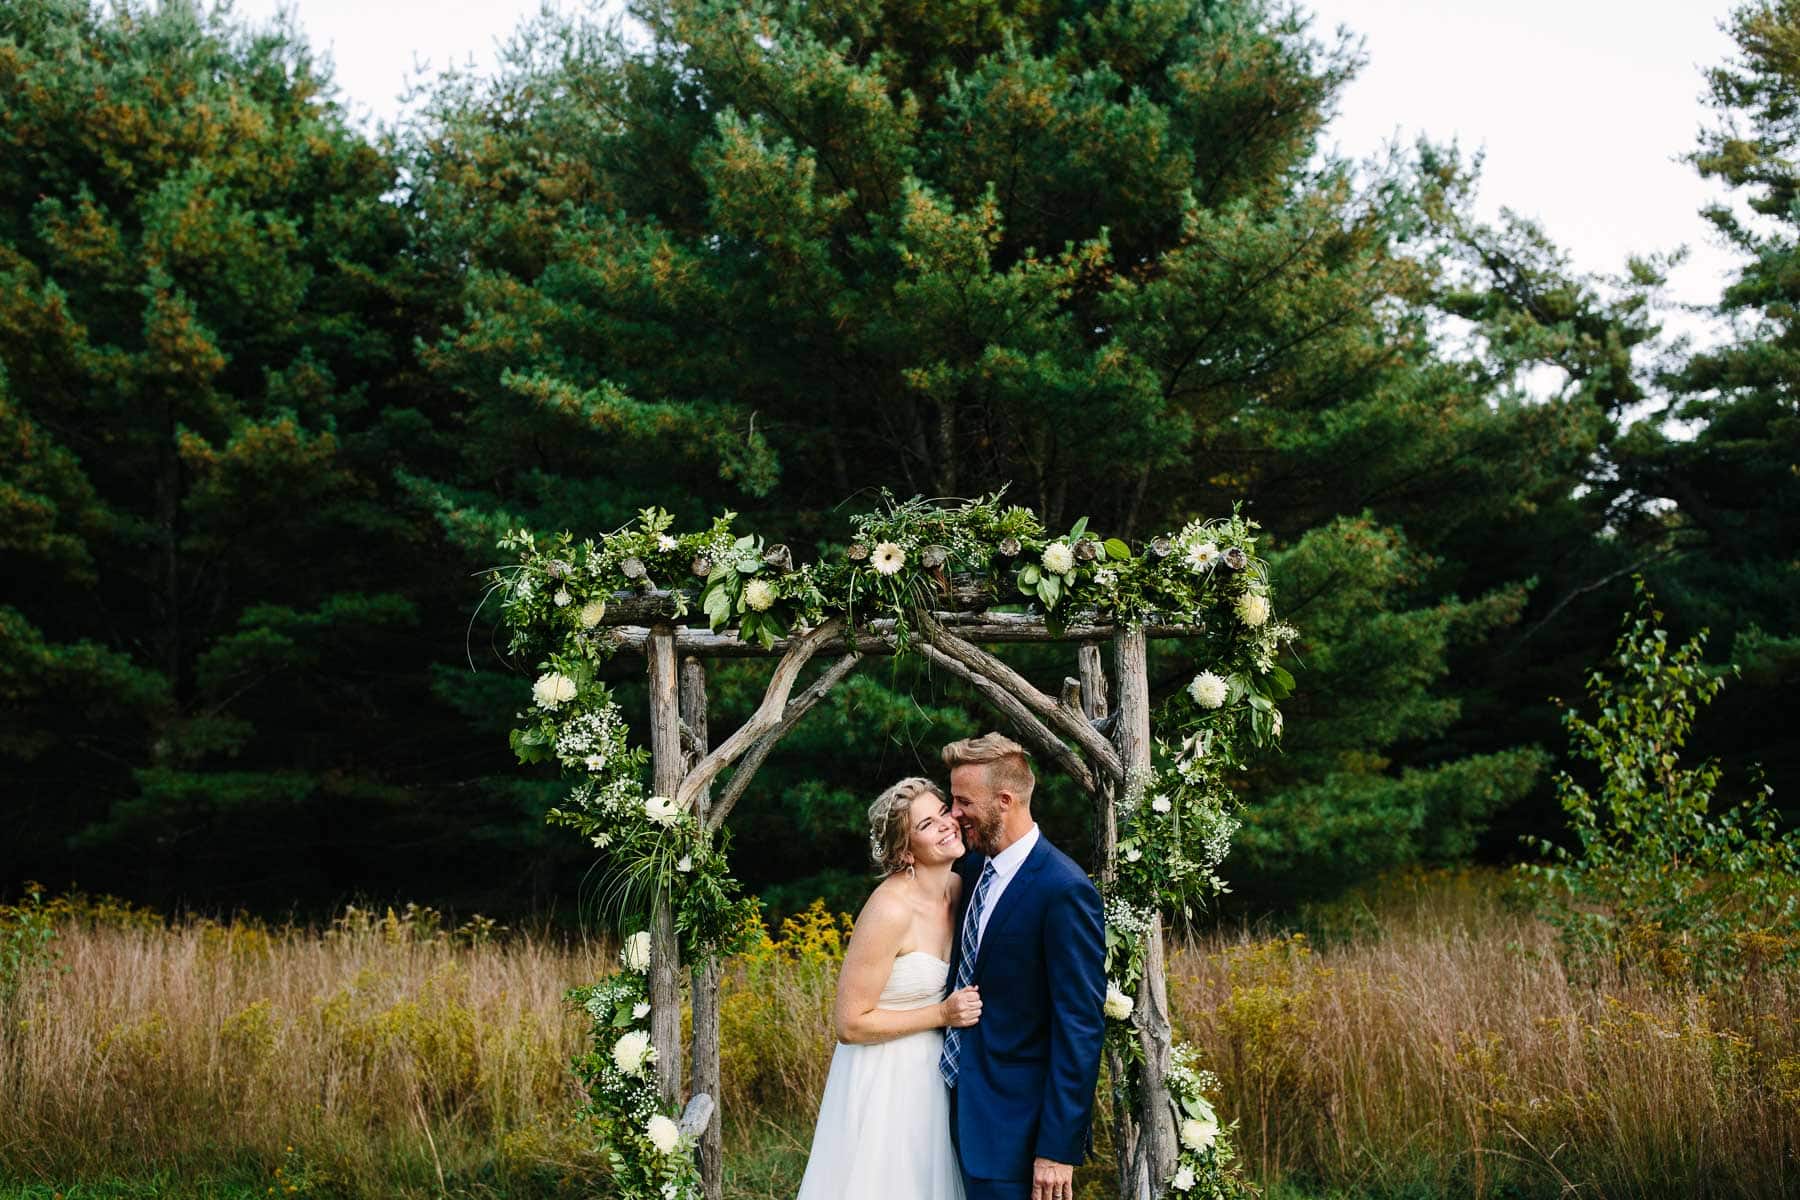 August Moon wedding of Leah and Erik in Sheffield, MA | Kelly Benvenuto Photography | Boston and Berkshires wedding photographer